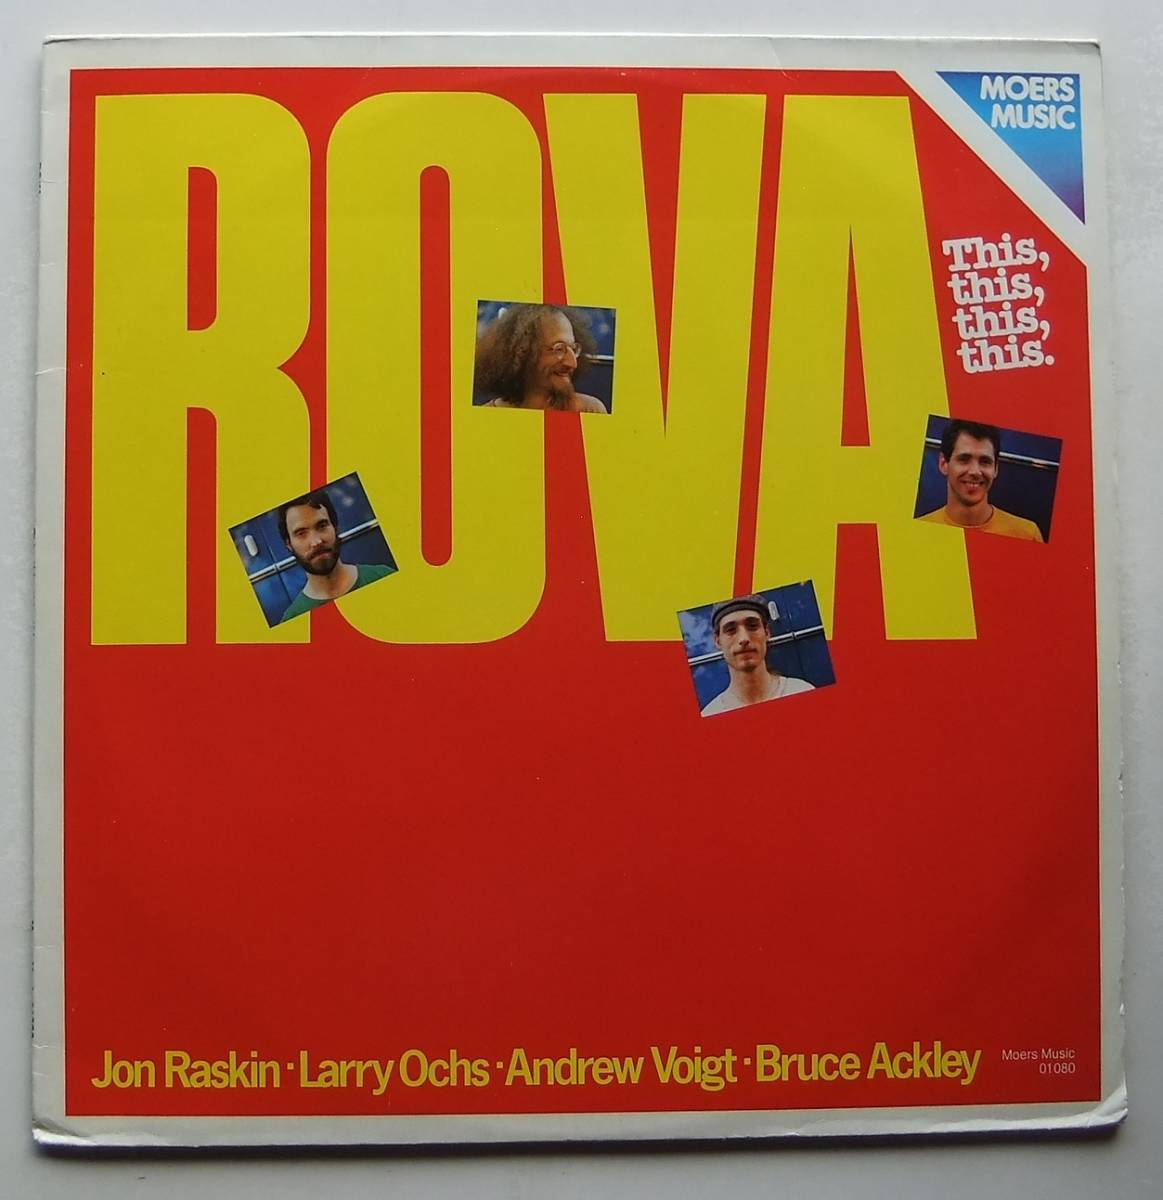 ◆ ROVA / This, This, This, This ◆ Moers Music 01080 (West Germany) ◆_画像1